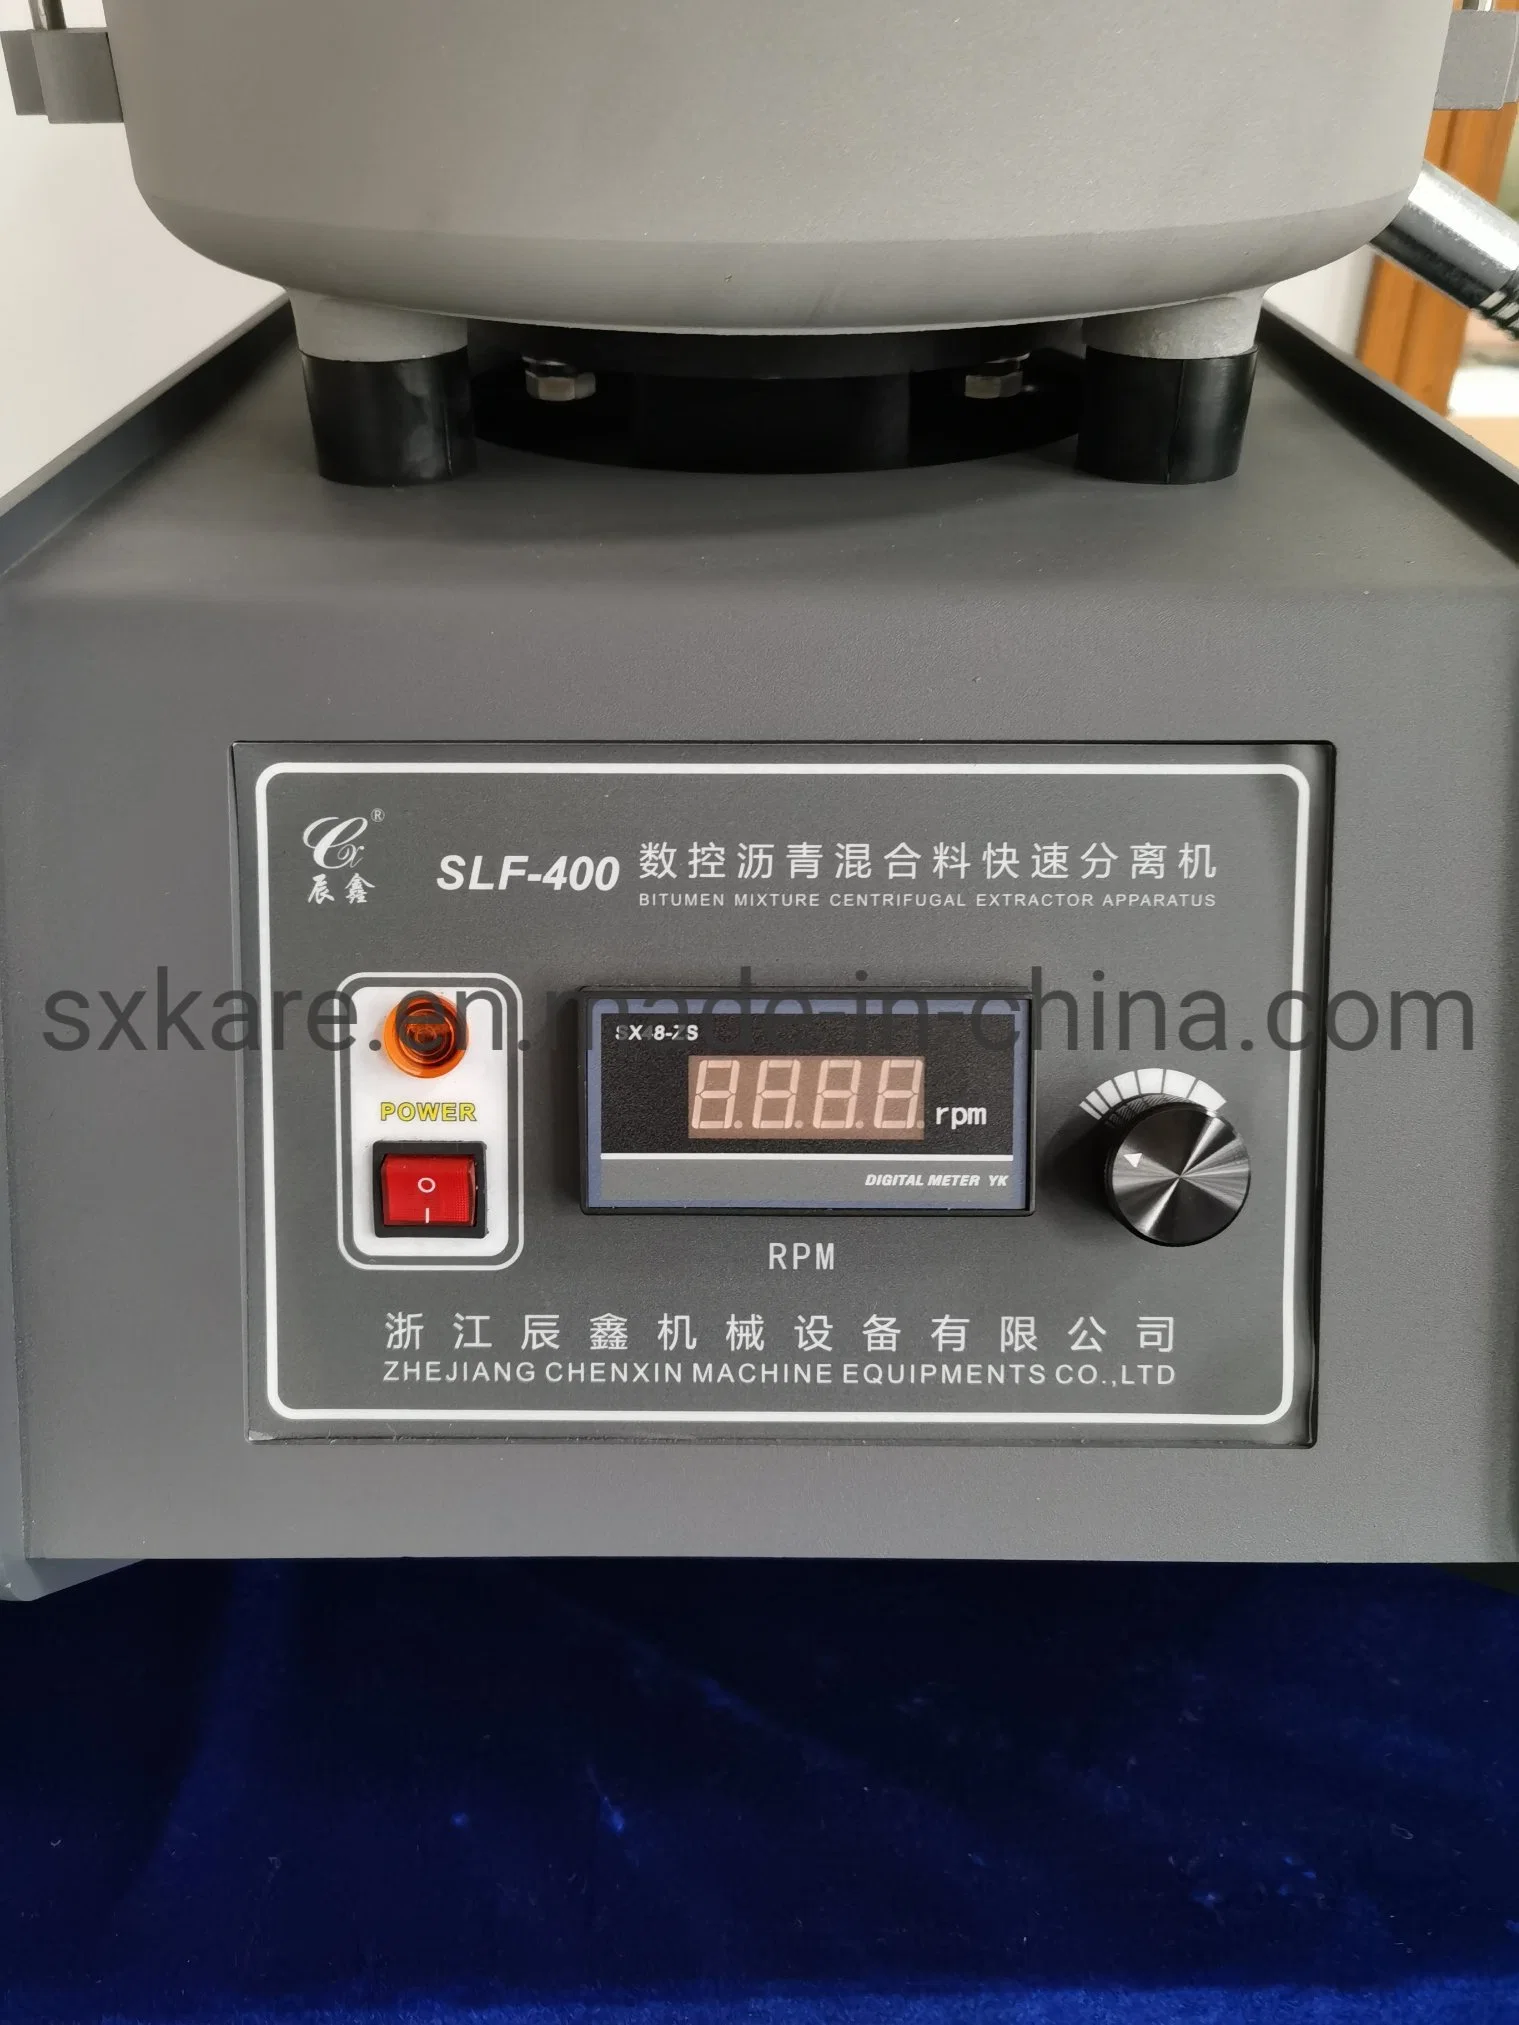 Bituminous Mixtures Centrifugal Extractor Test Equipment with Rmp Meter (SLF-400)